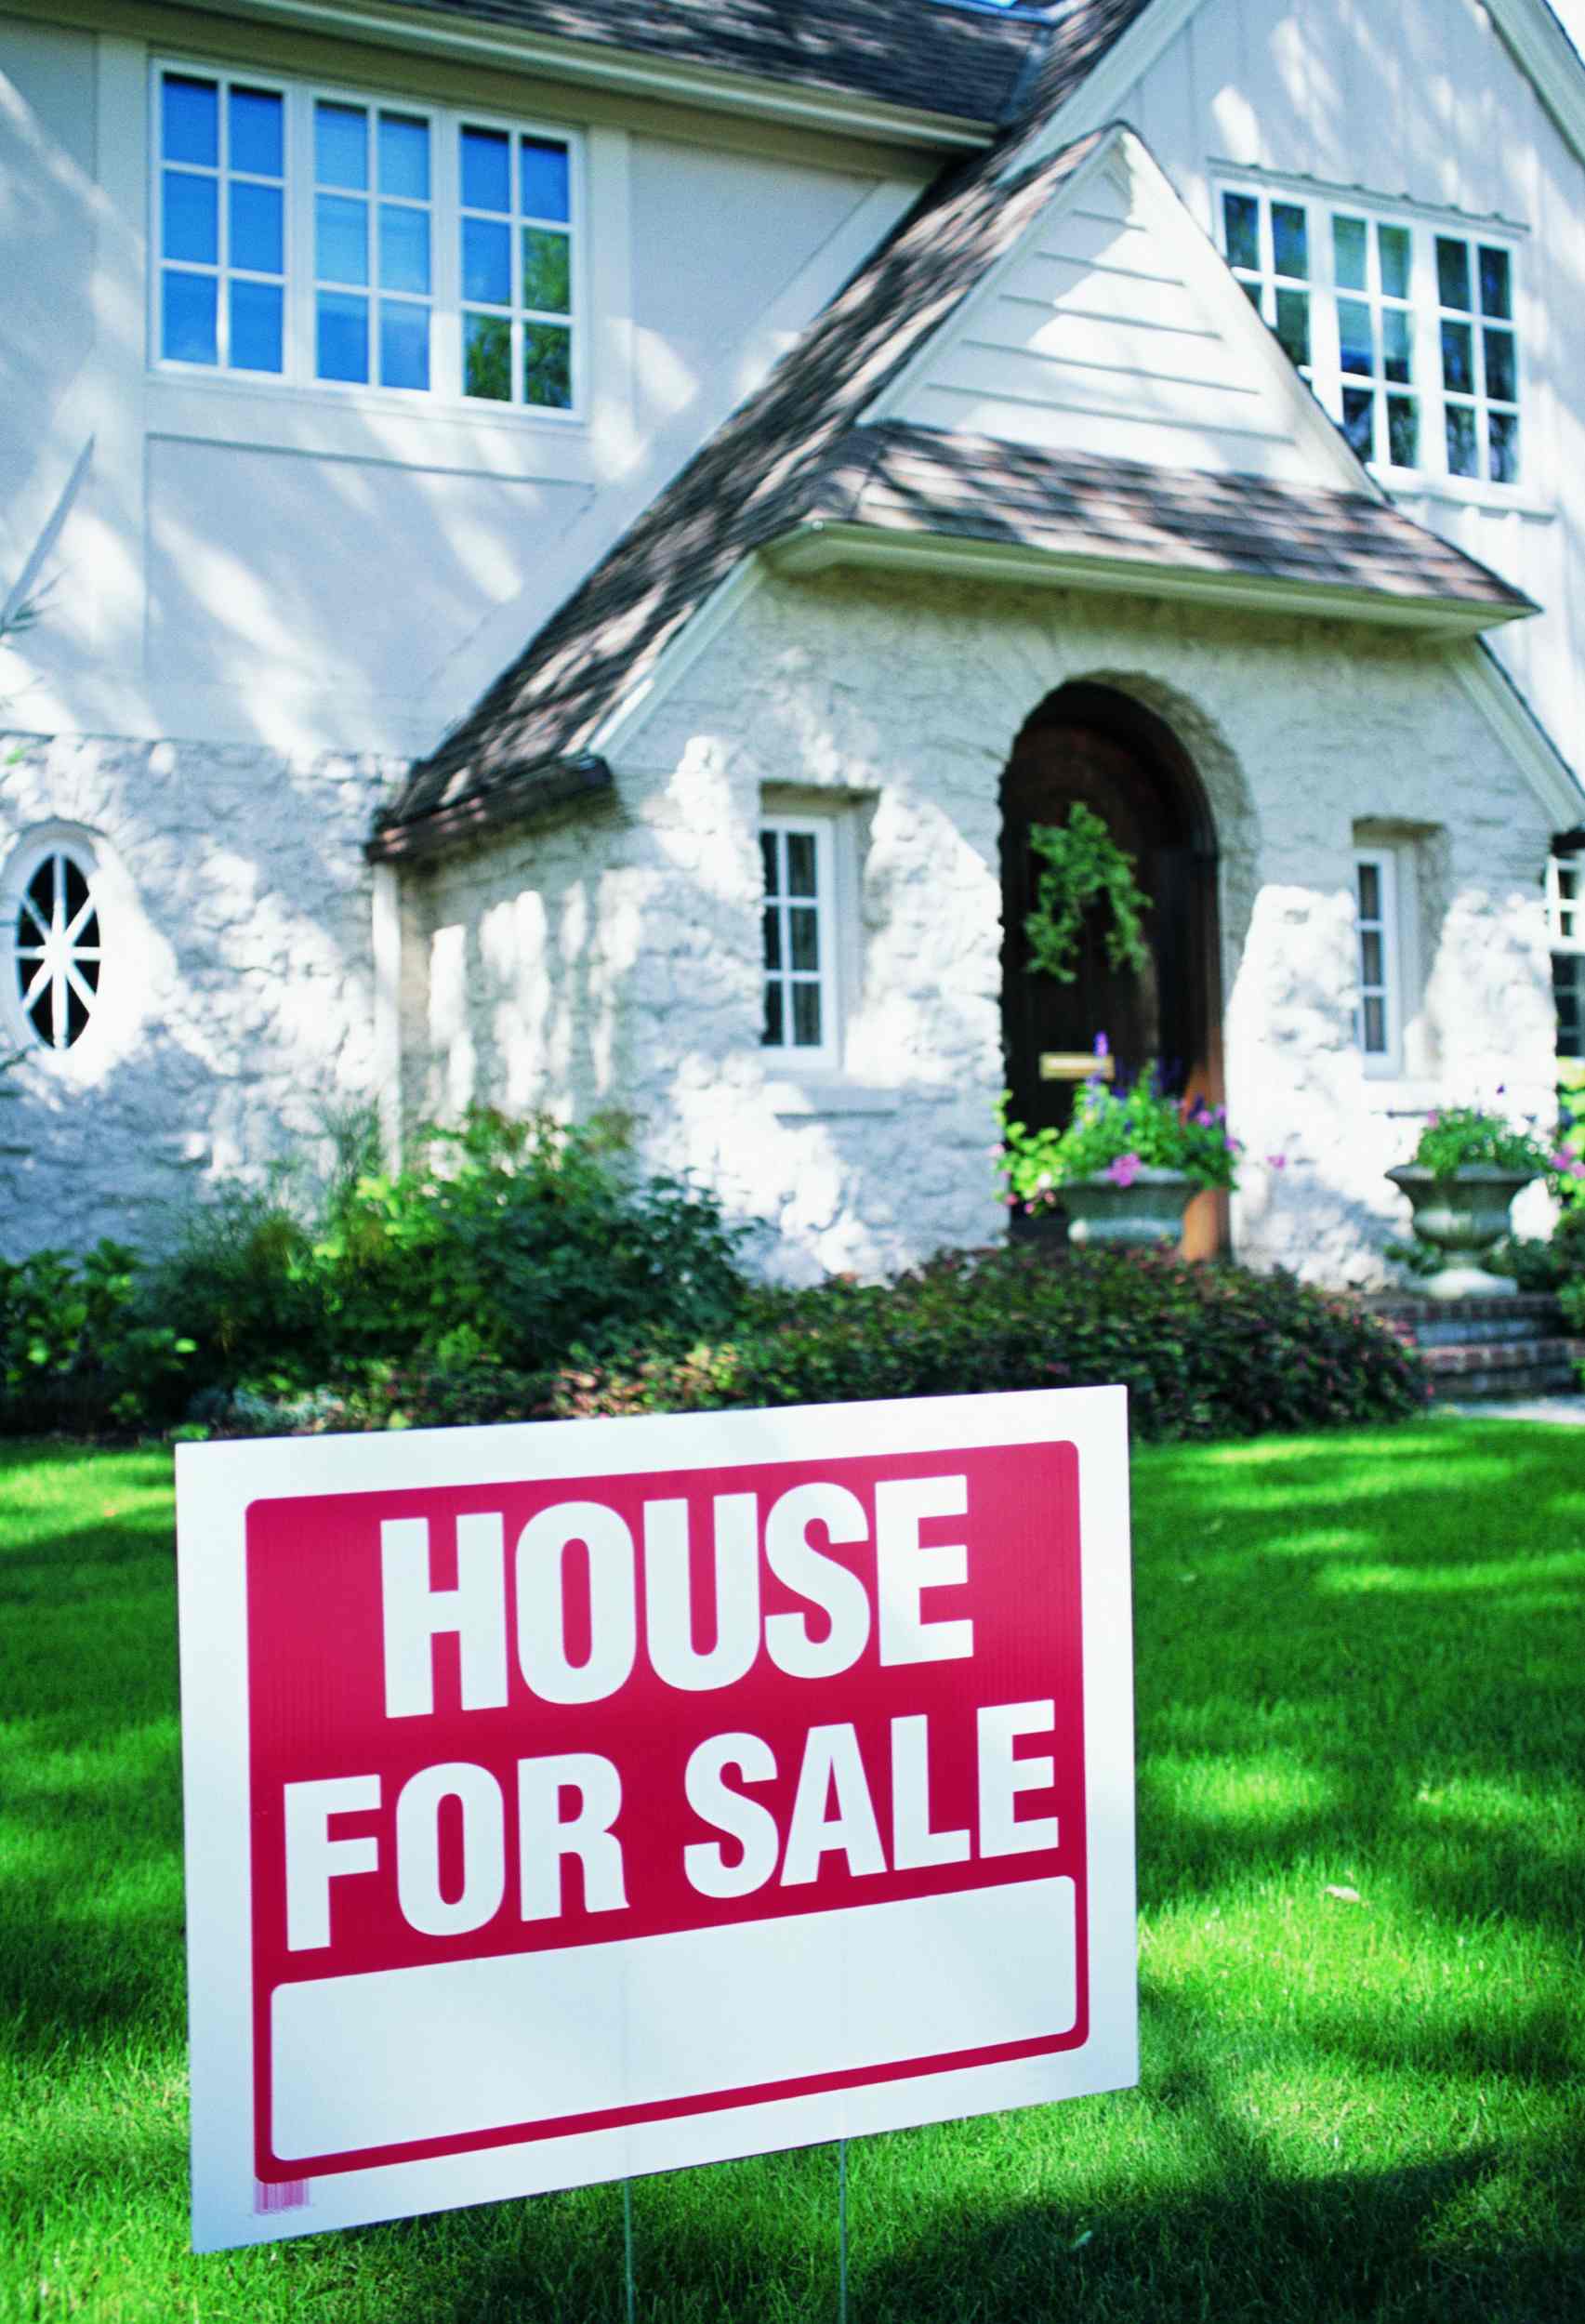 10 Things to Do Before Selling Your House